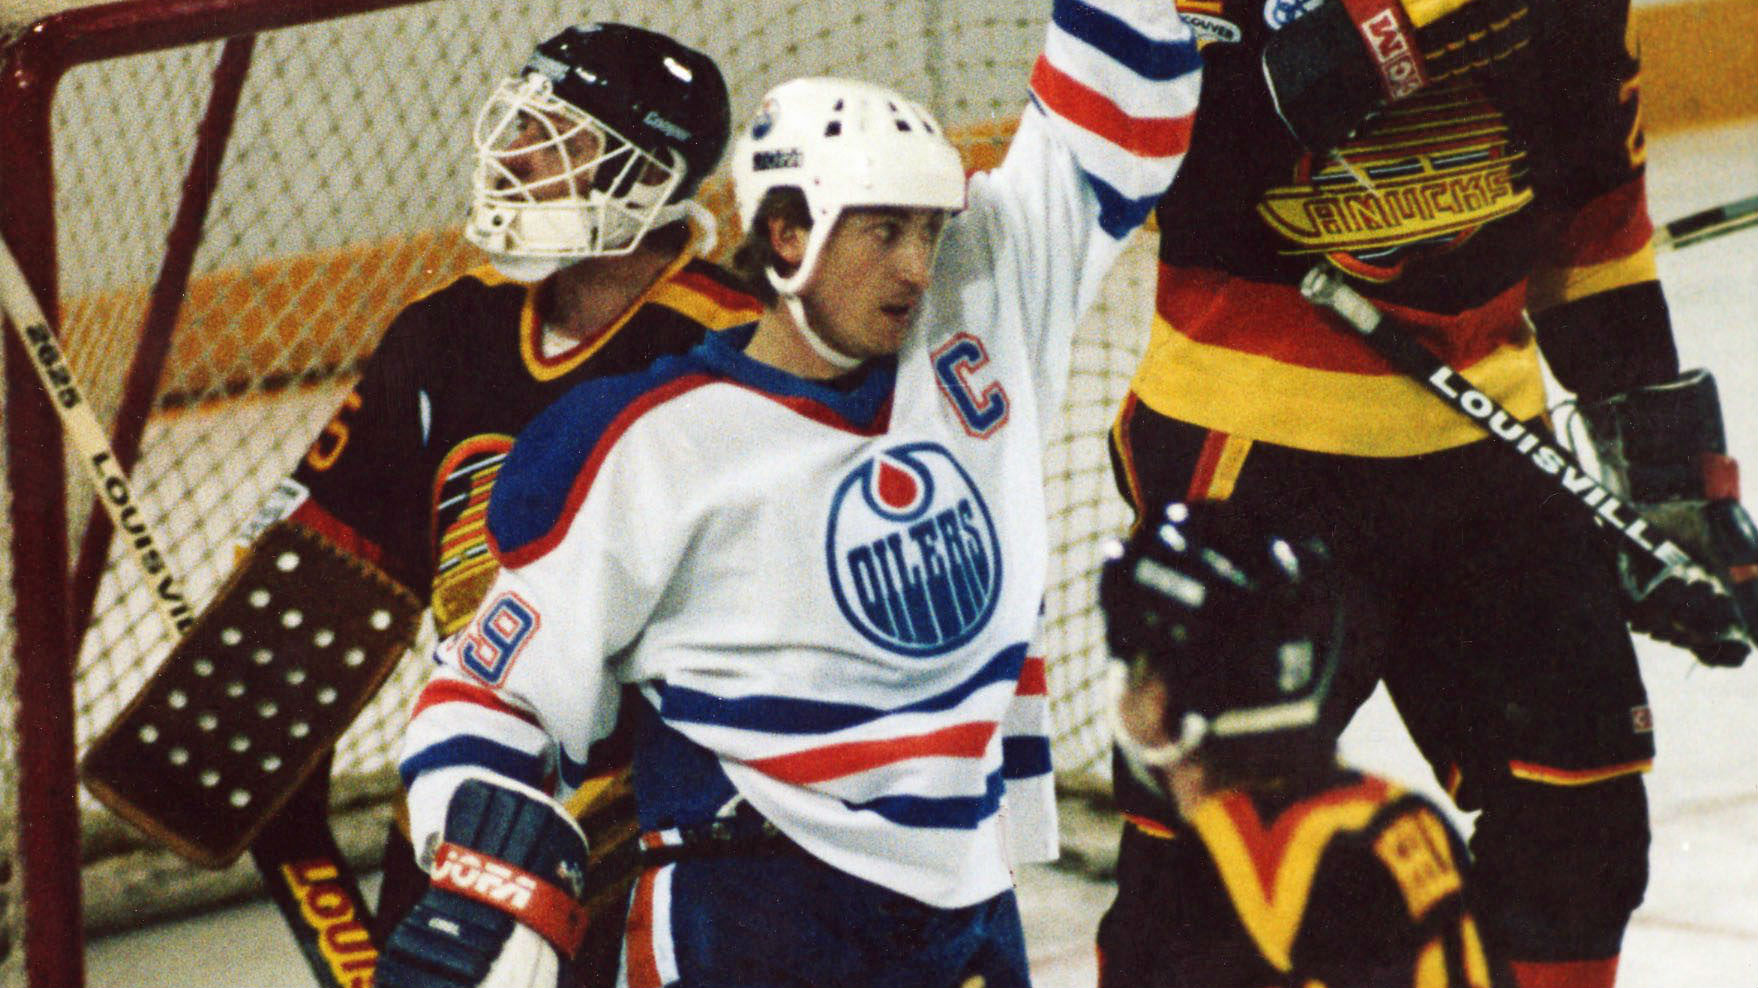 Kerry Fraser opens up about Wayne Gretzky's infamous high stick on